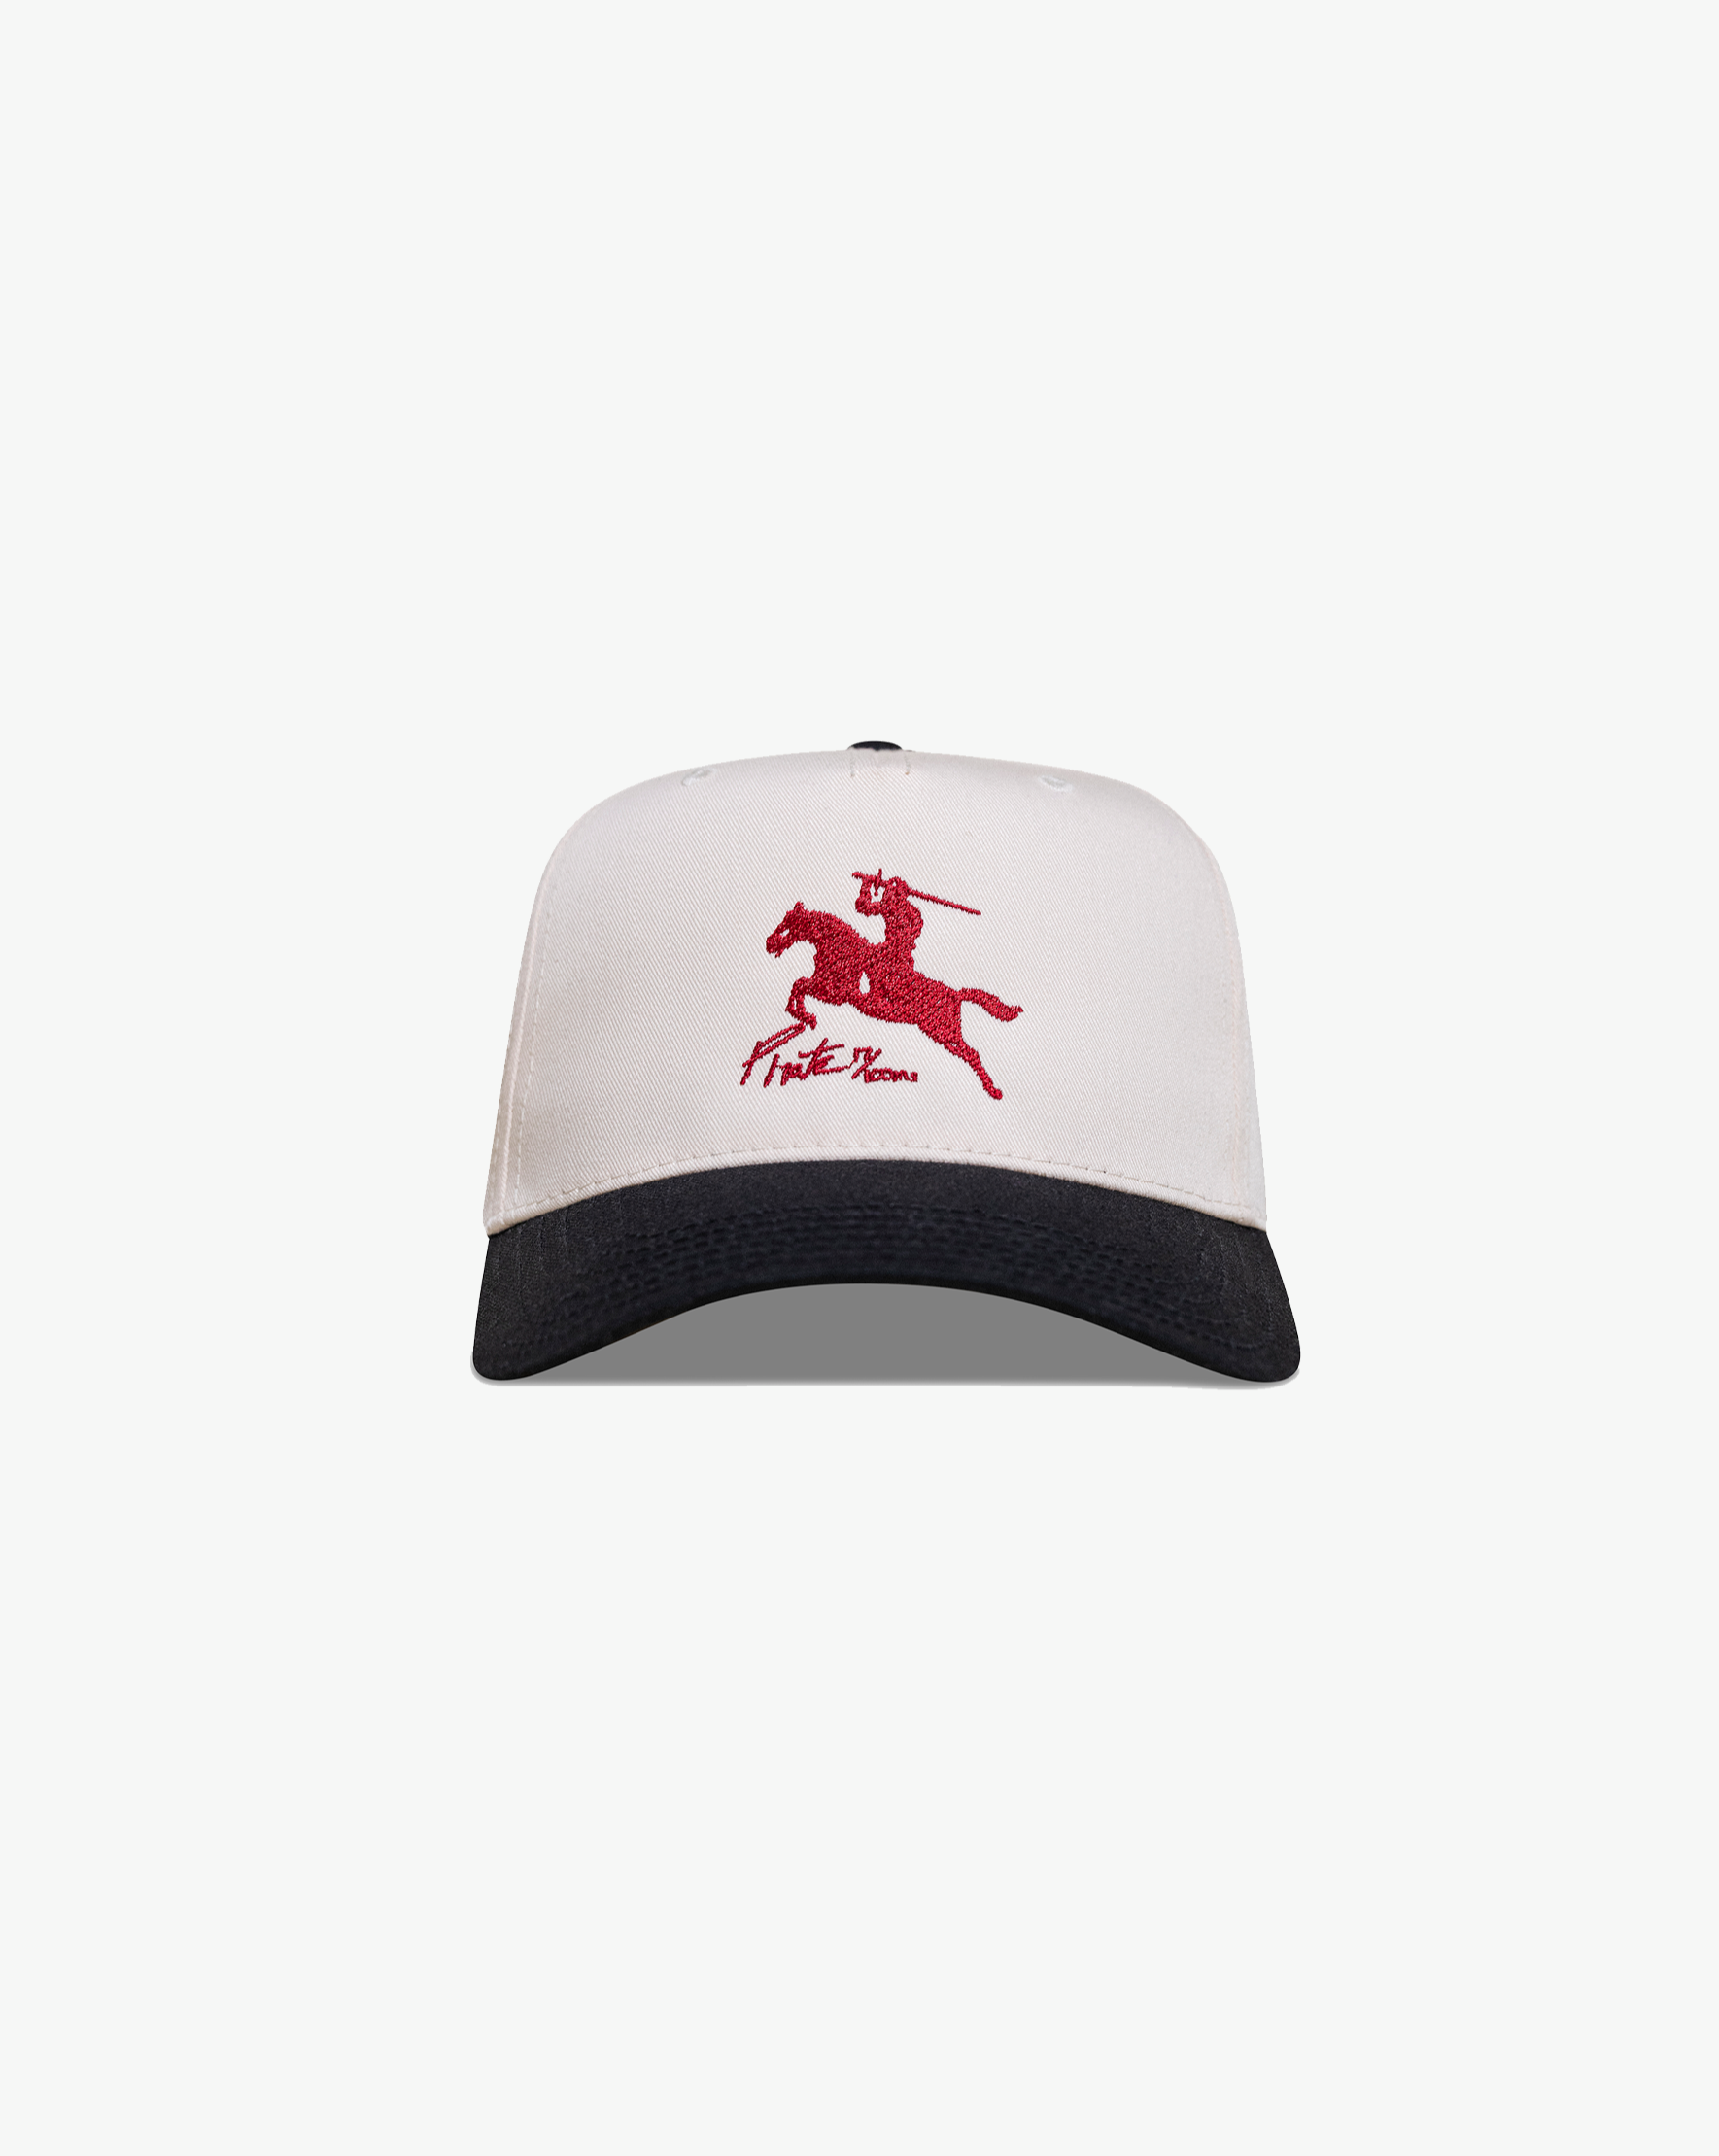 Pirate By Any Means Hat Merlot Stitching (Cream/Black)